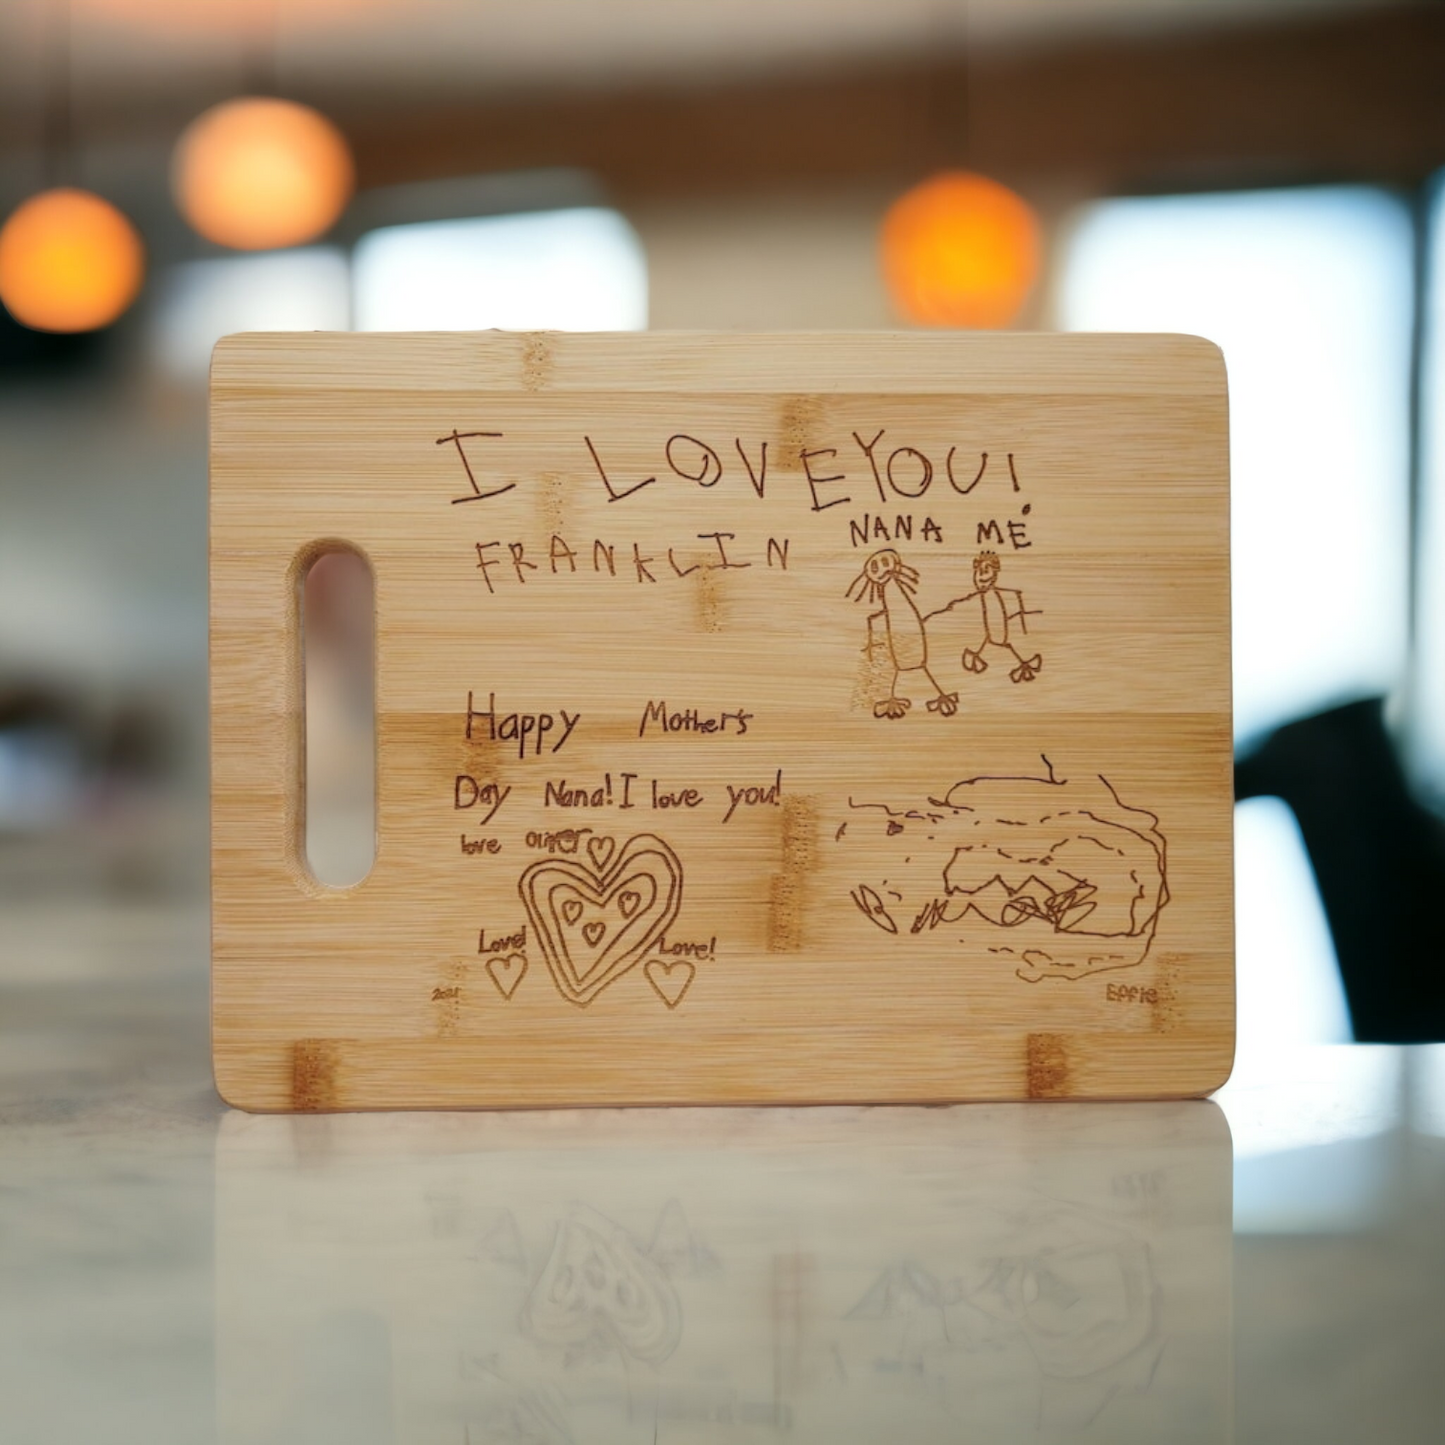 Custom Cutting Board engraved with Kid’s Drawing/Note!